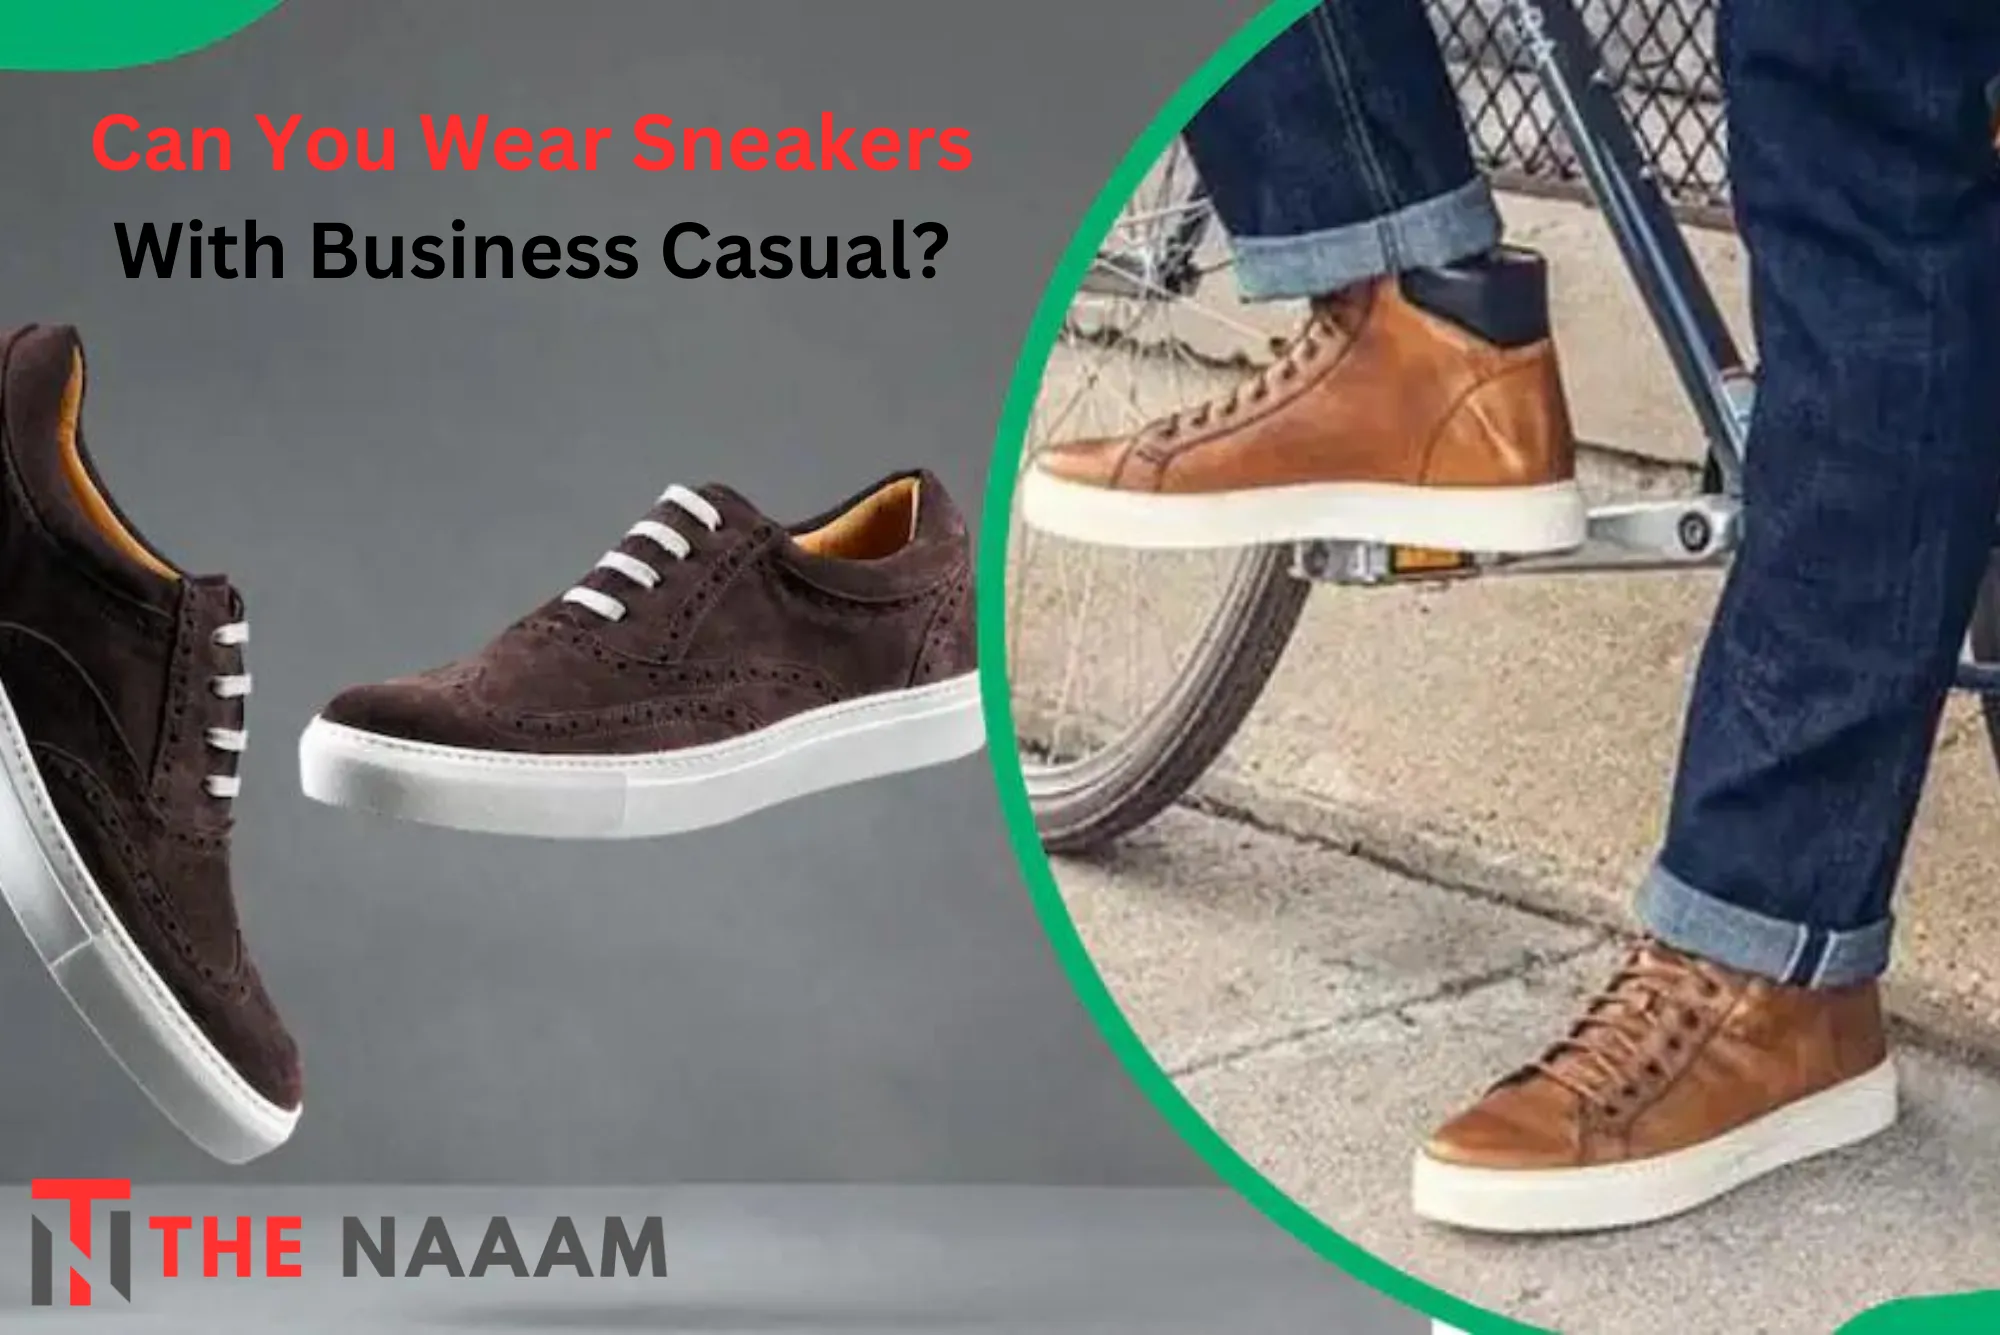 Can You Wear Sneakers With Business Casual